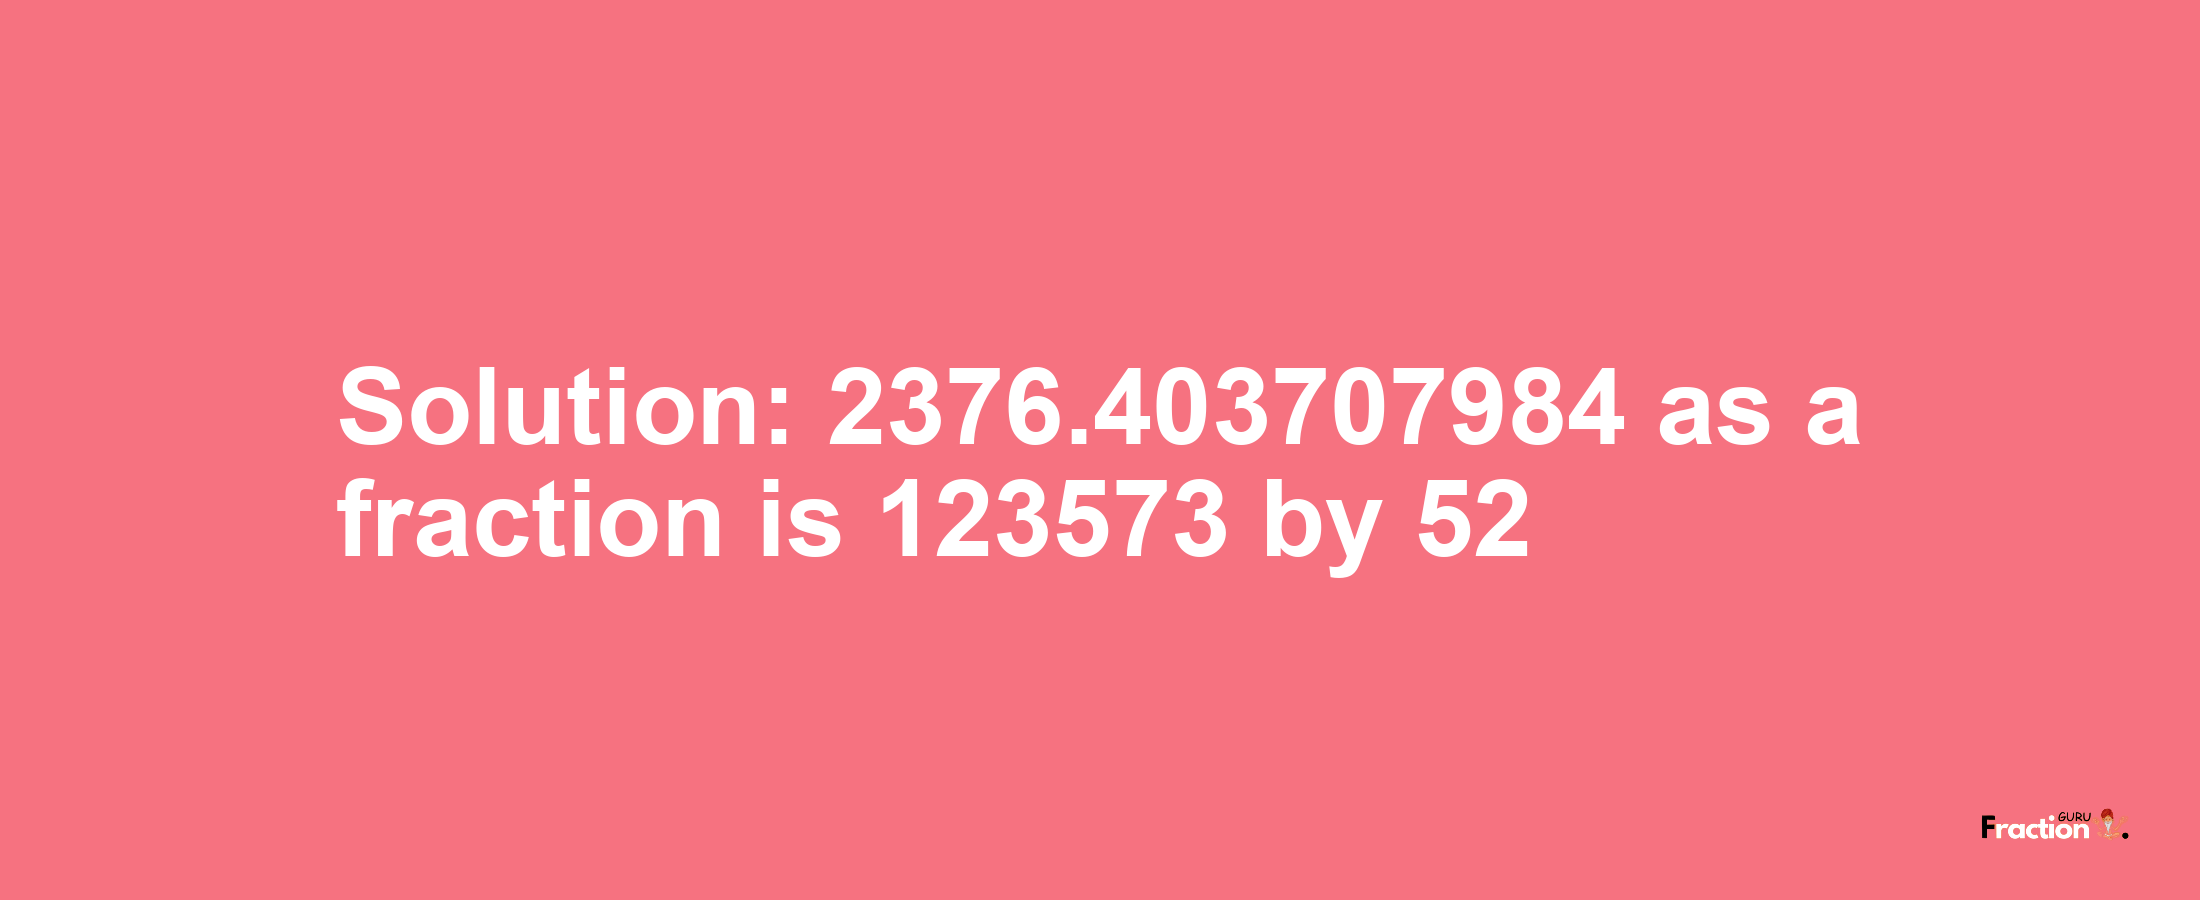 Solution:2376.403707984 as a fraction is 123573/52